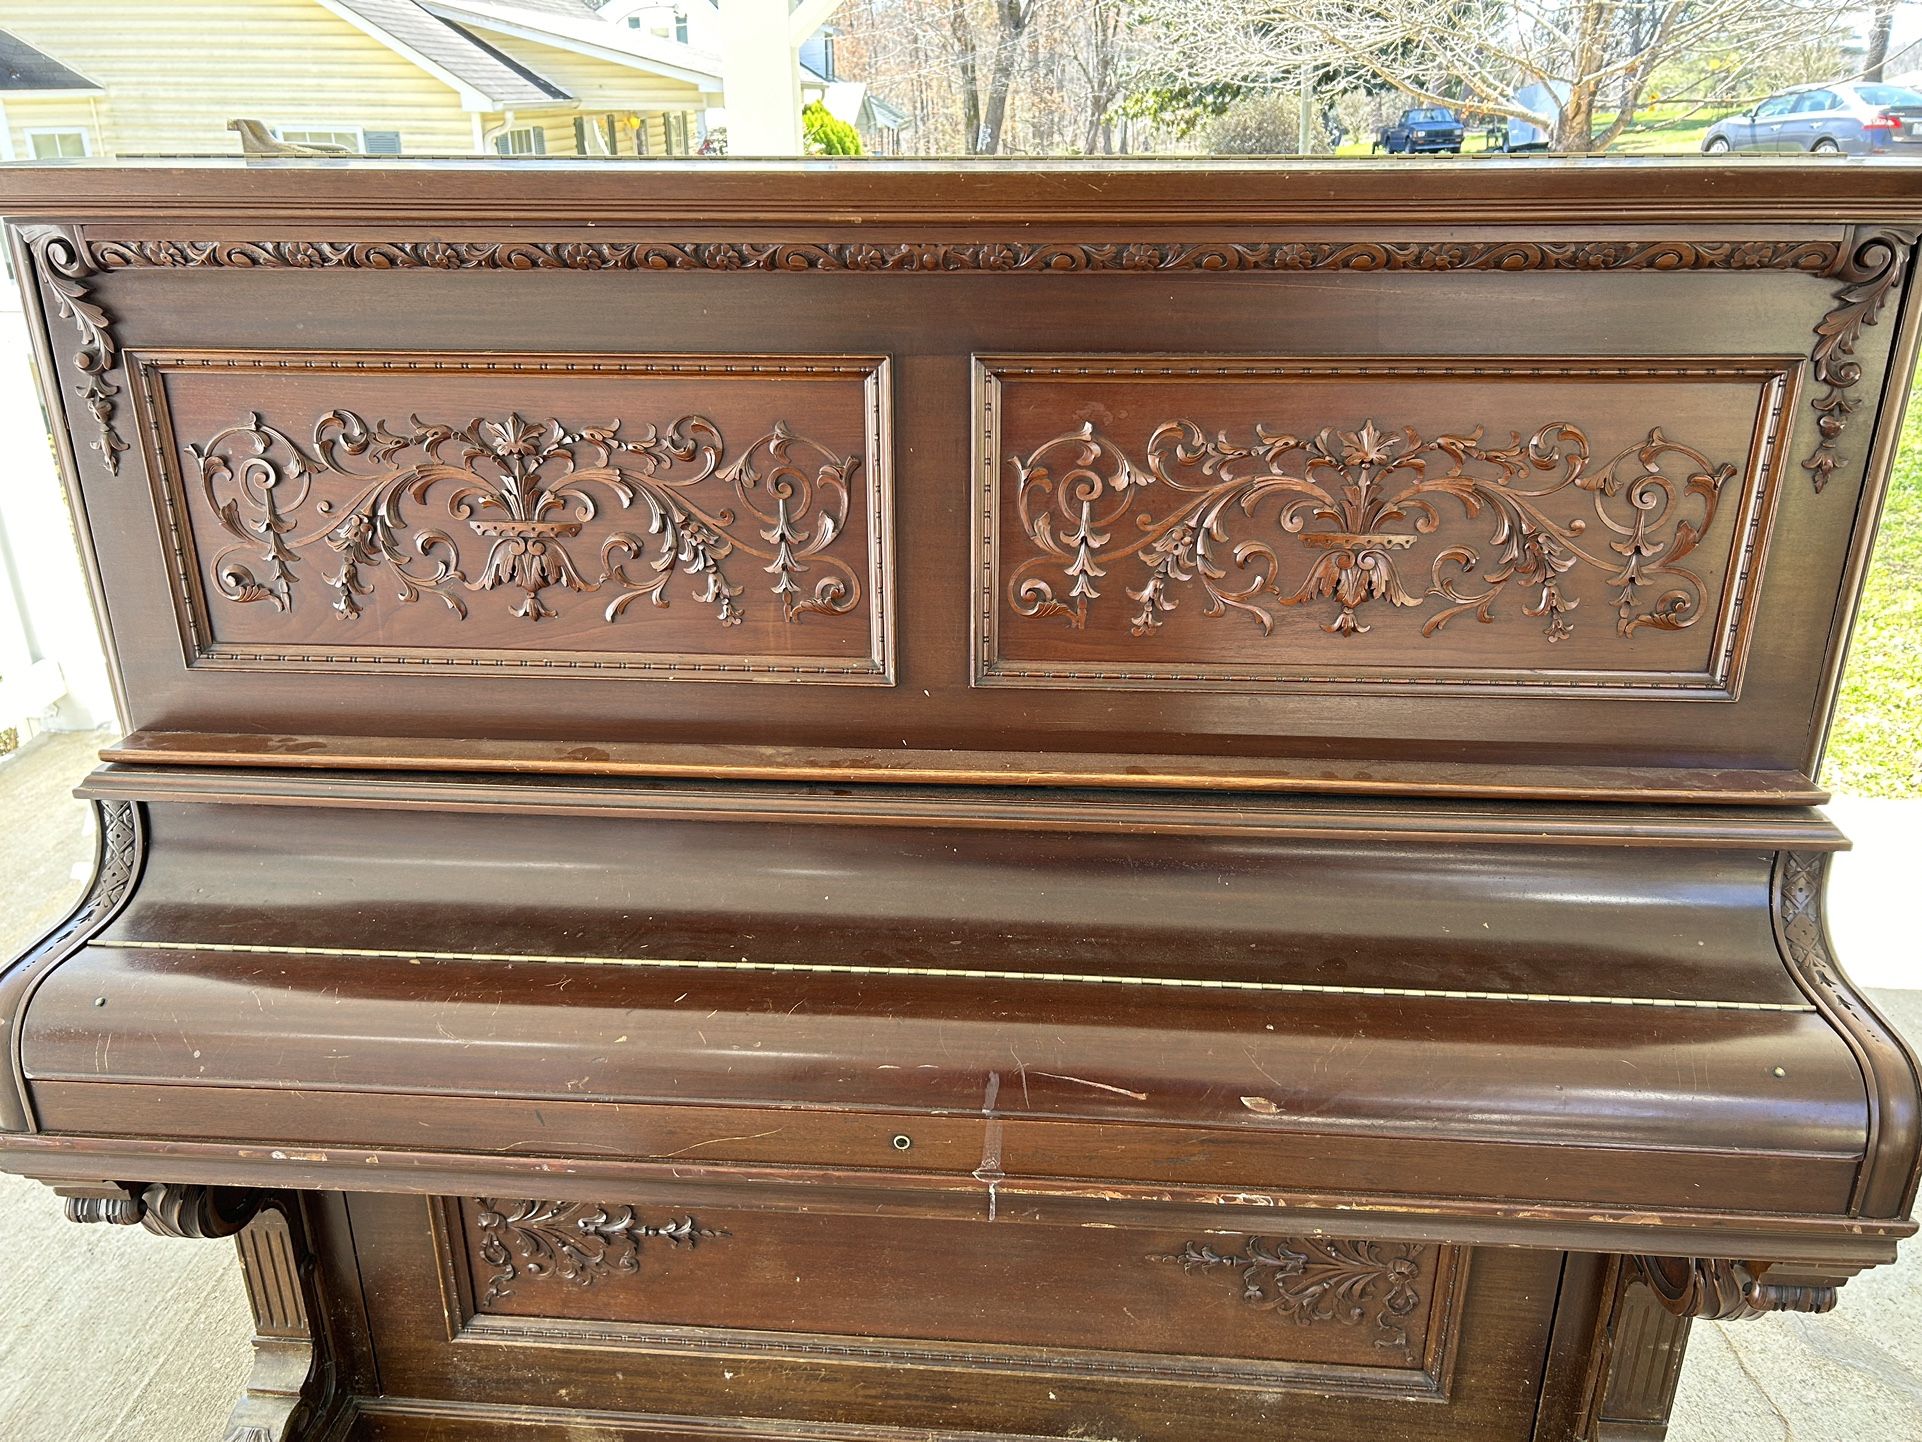 1920’s Ivers & Pond Piano